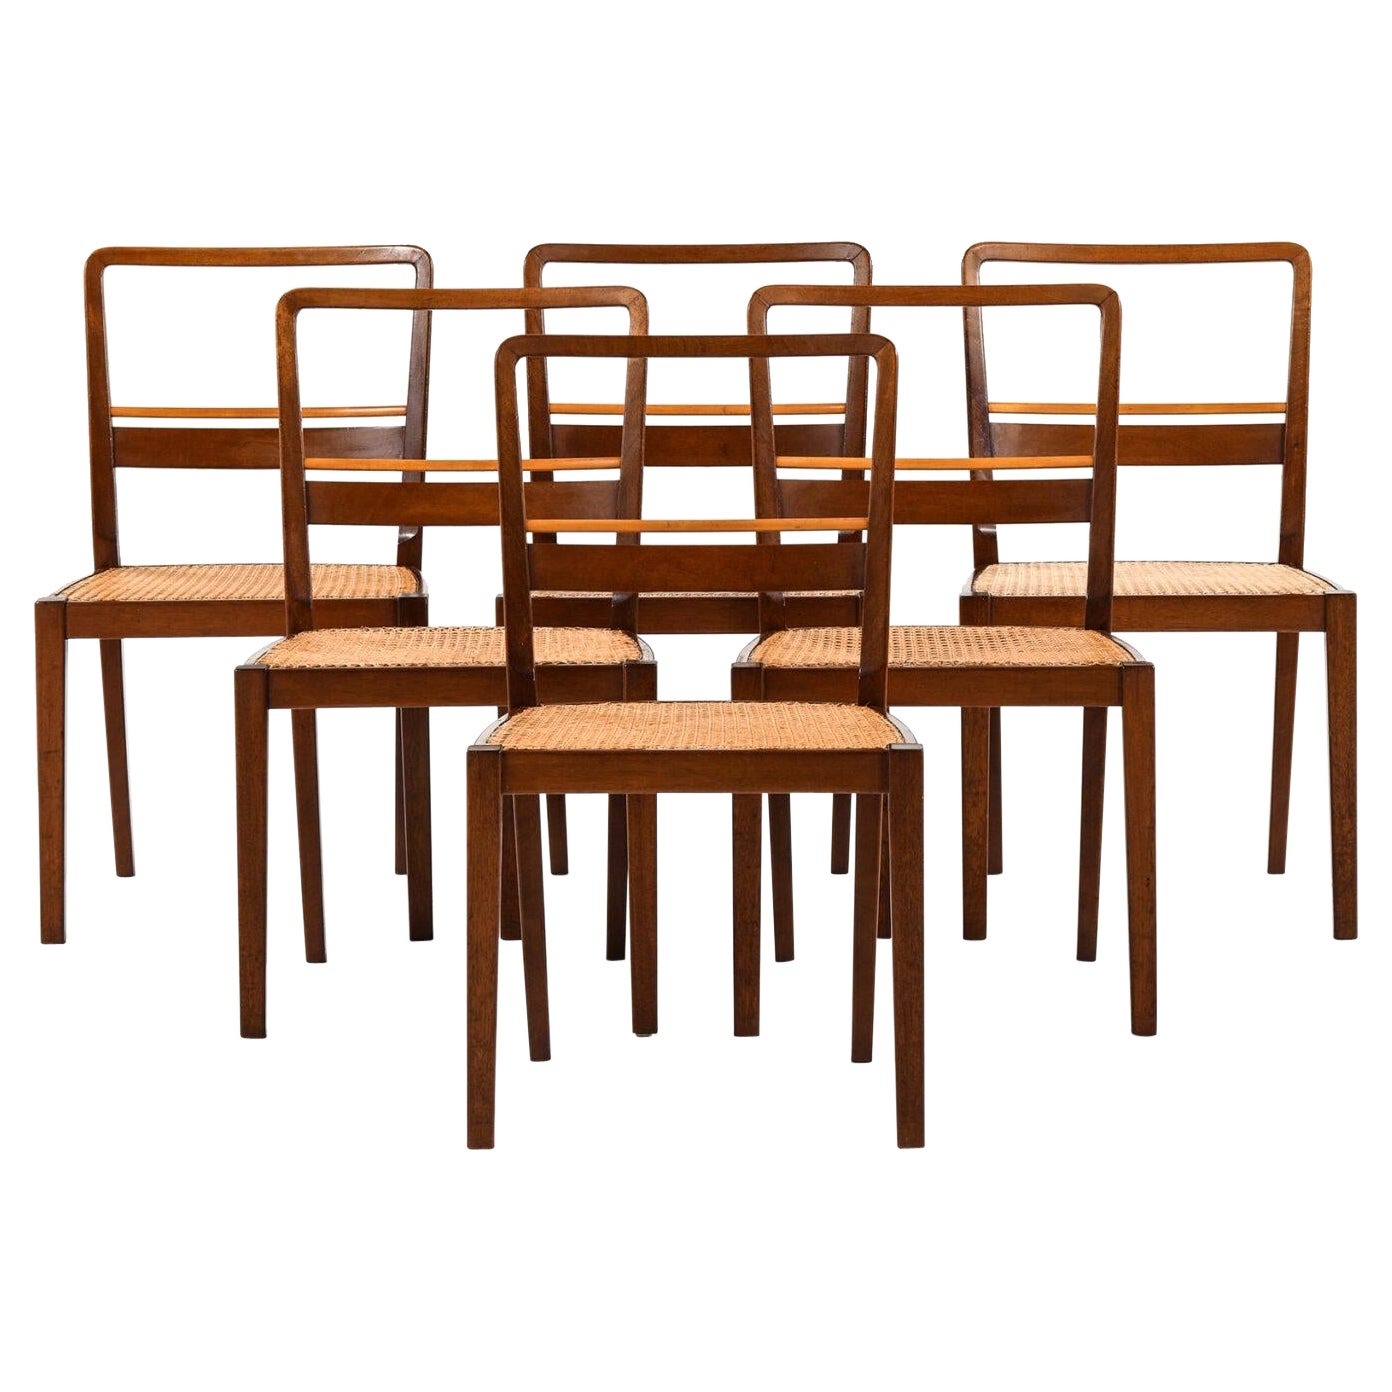 Erik Chambert Dining Chairs Produced by AB Chamberts Möbelfabrik in Norrköping